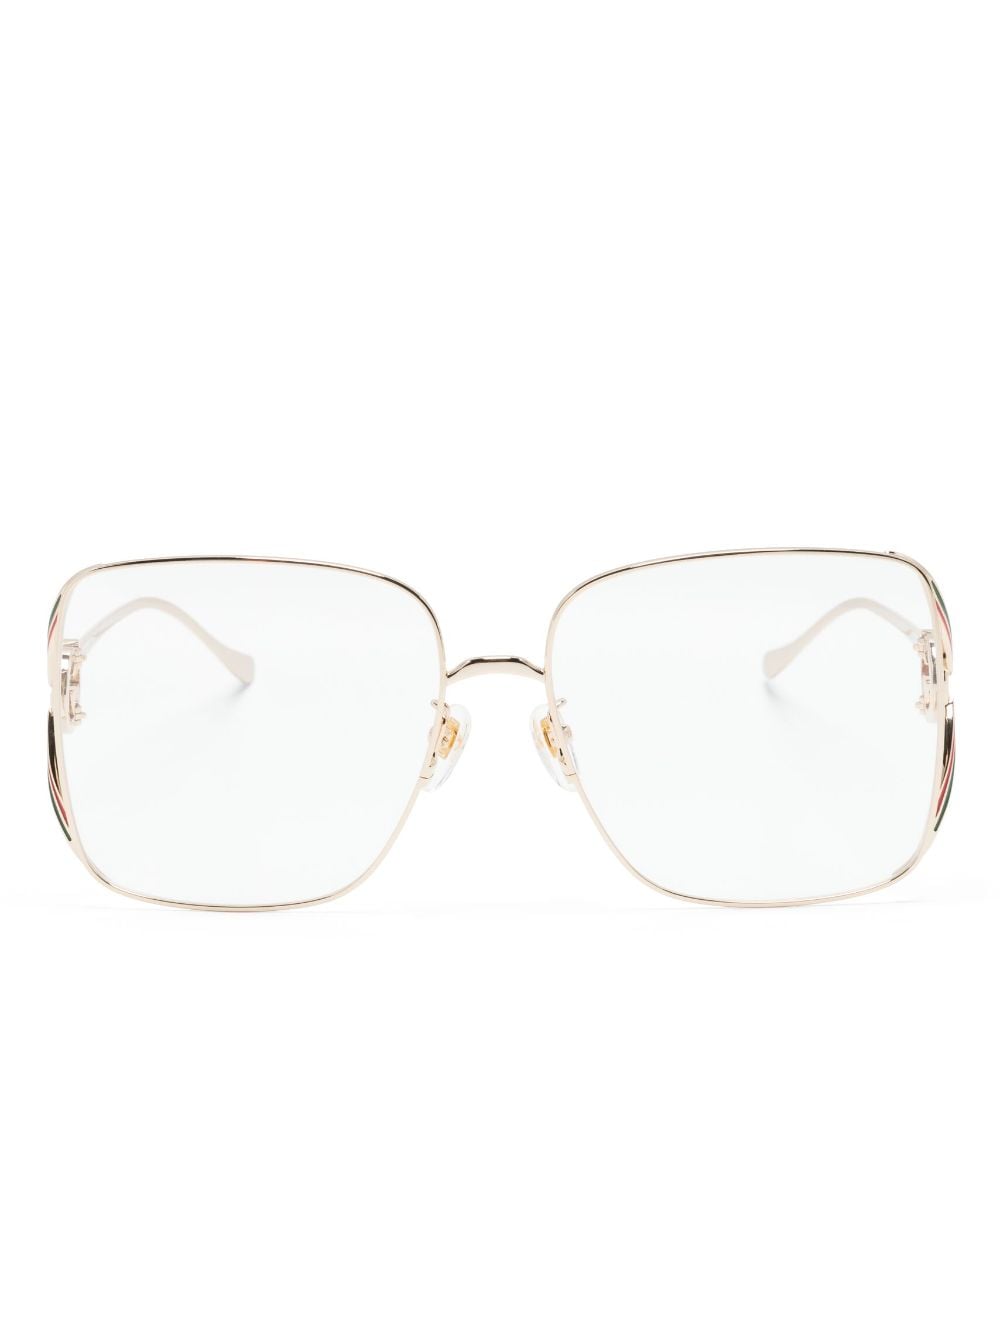 Gucci Sculpted-arm Square-frame Glasses In Gold